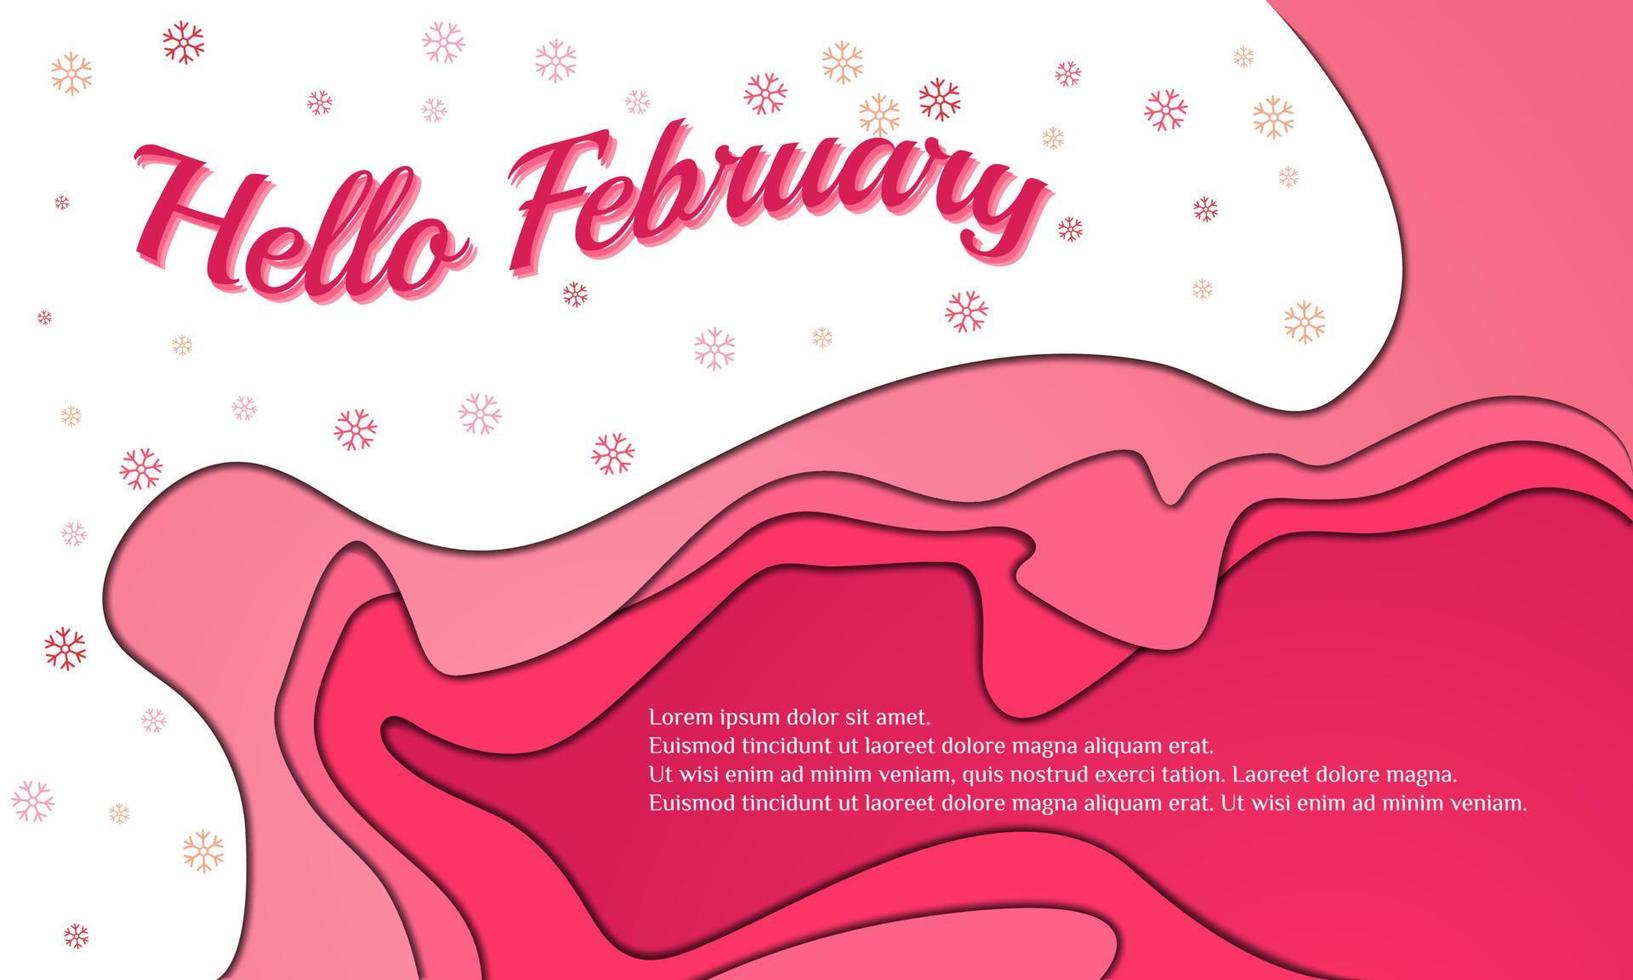 Hello February Background or Greeting Card Design. With pink and white color. Premium vector template